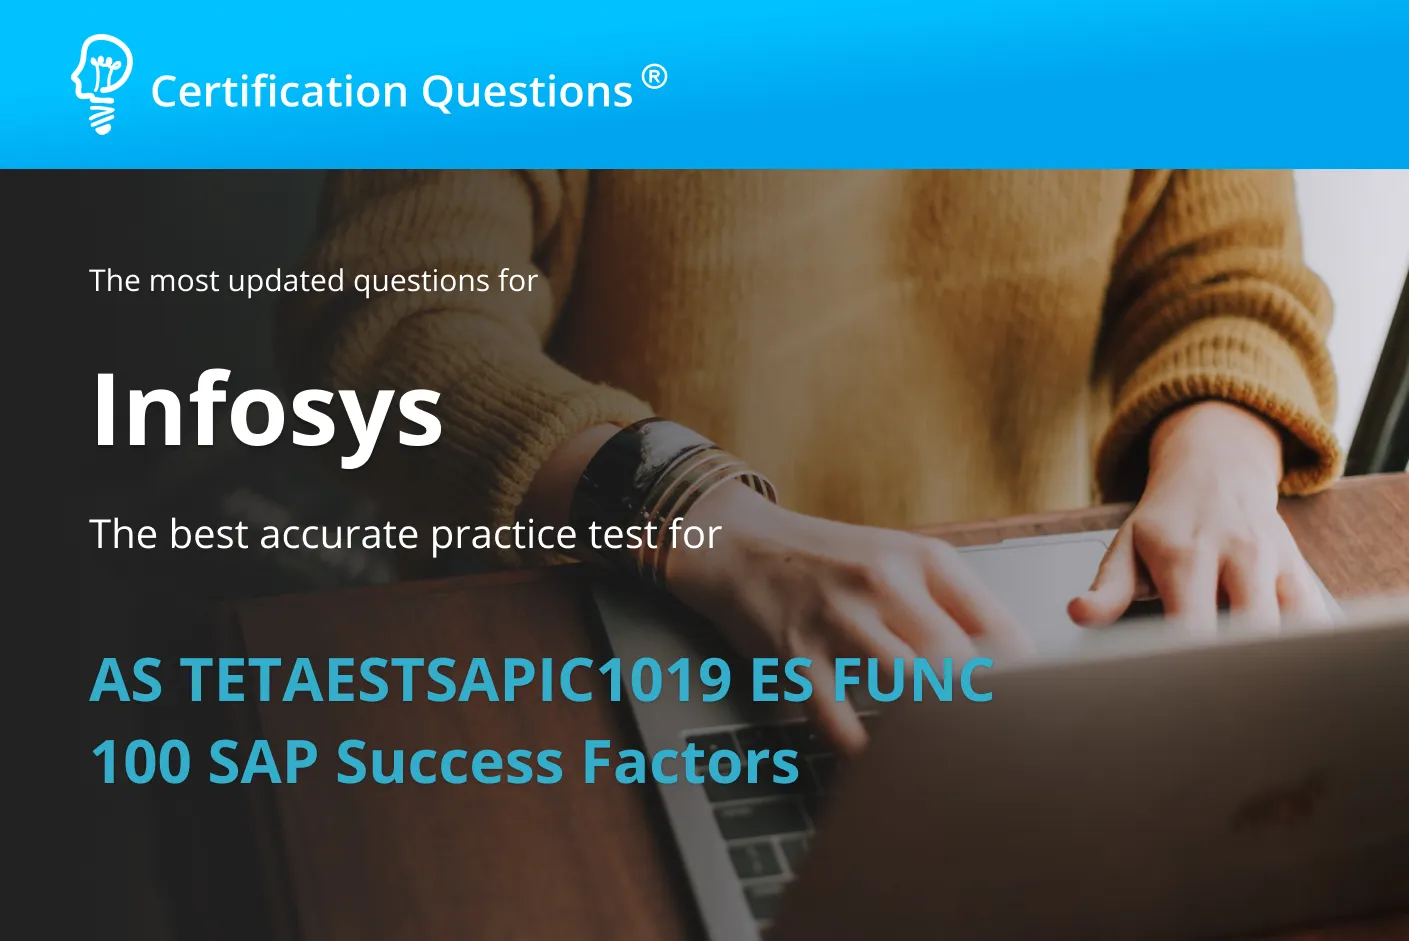 This image is related to the as tetaestsapic1019 es func 100 sap questions.